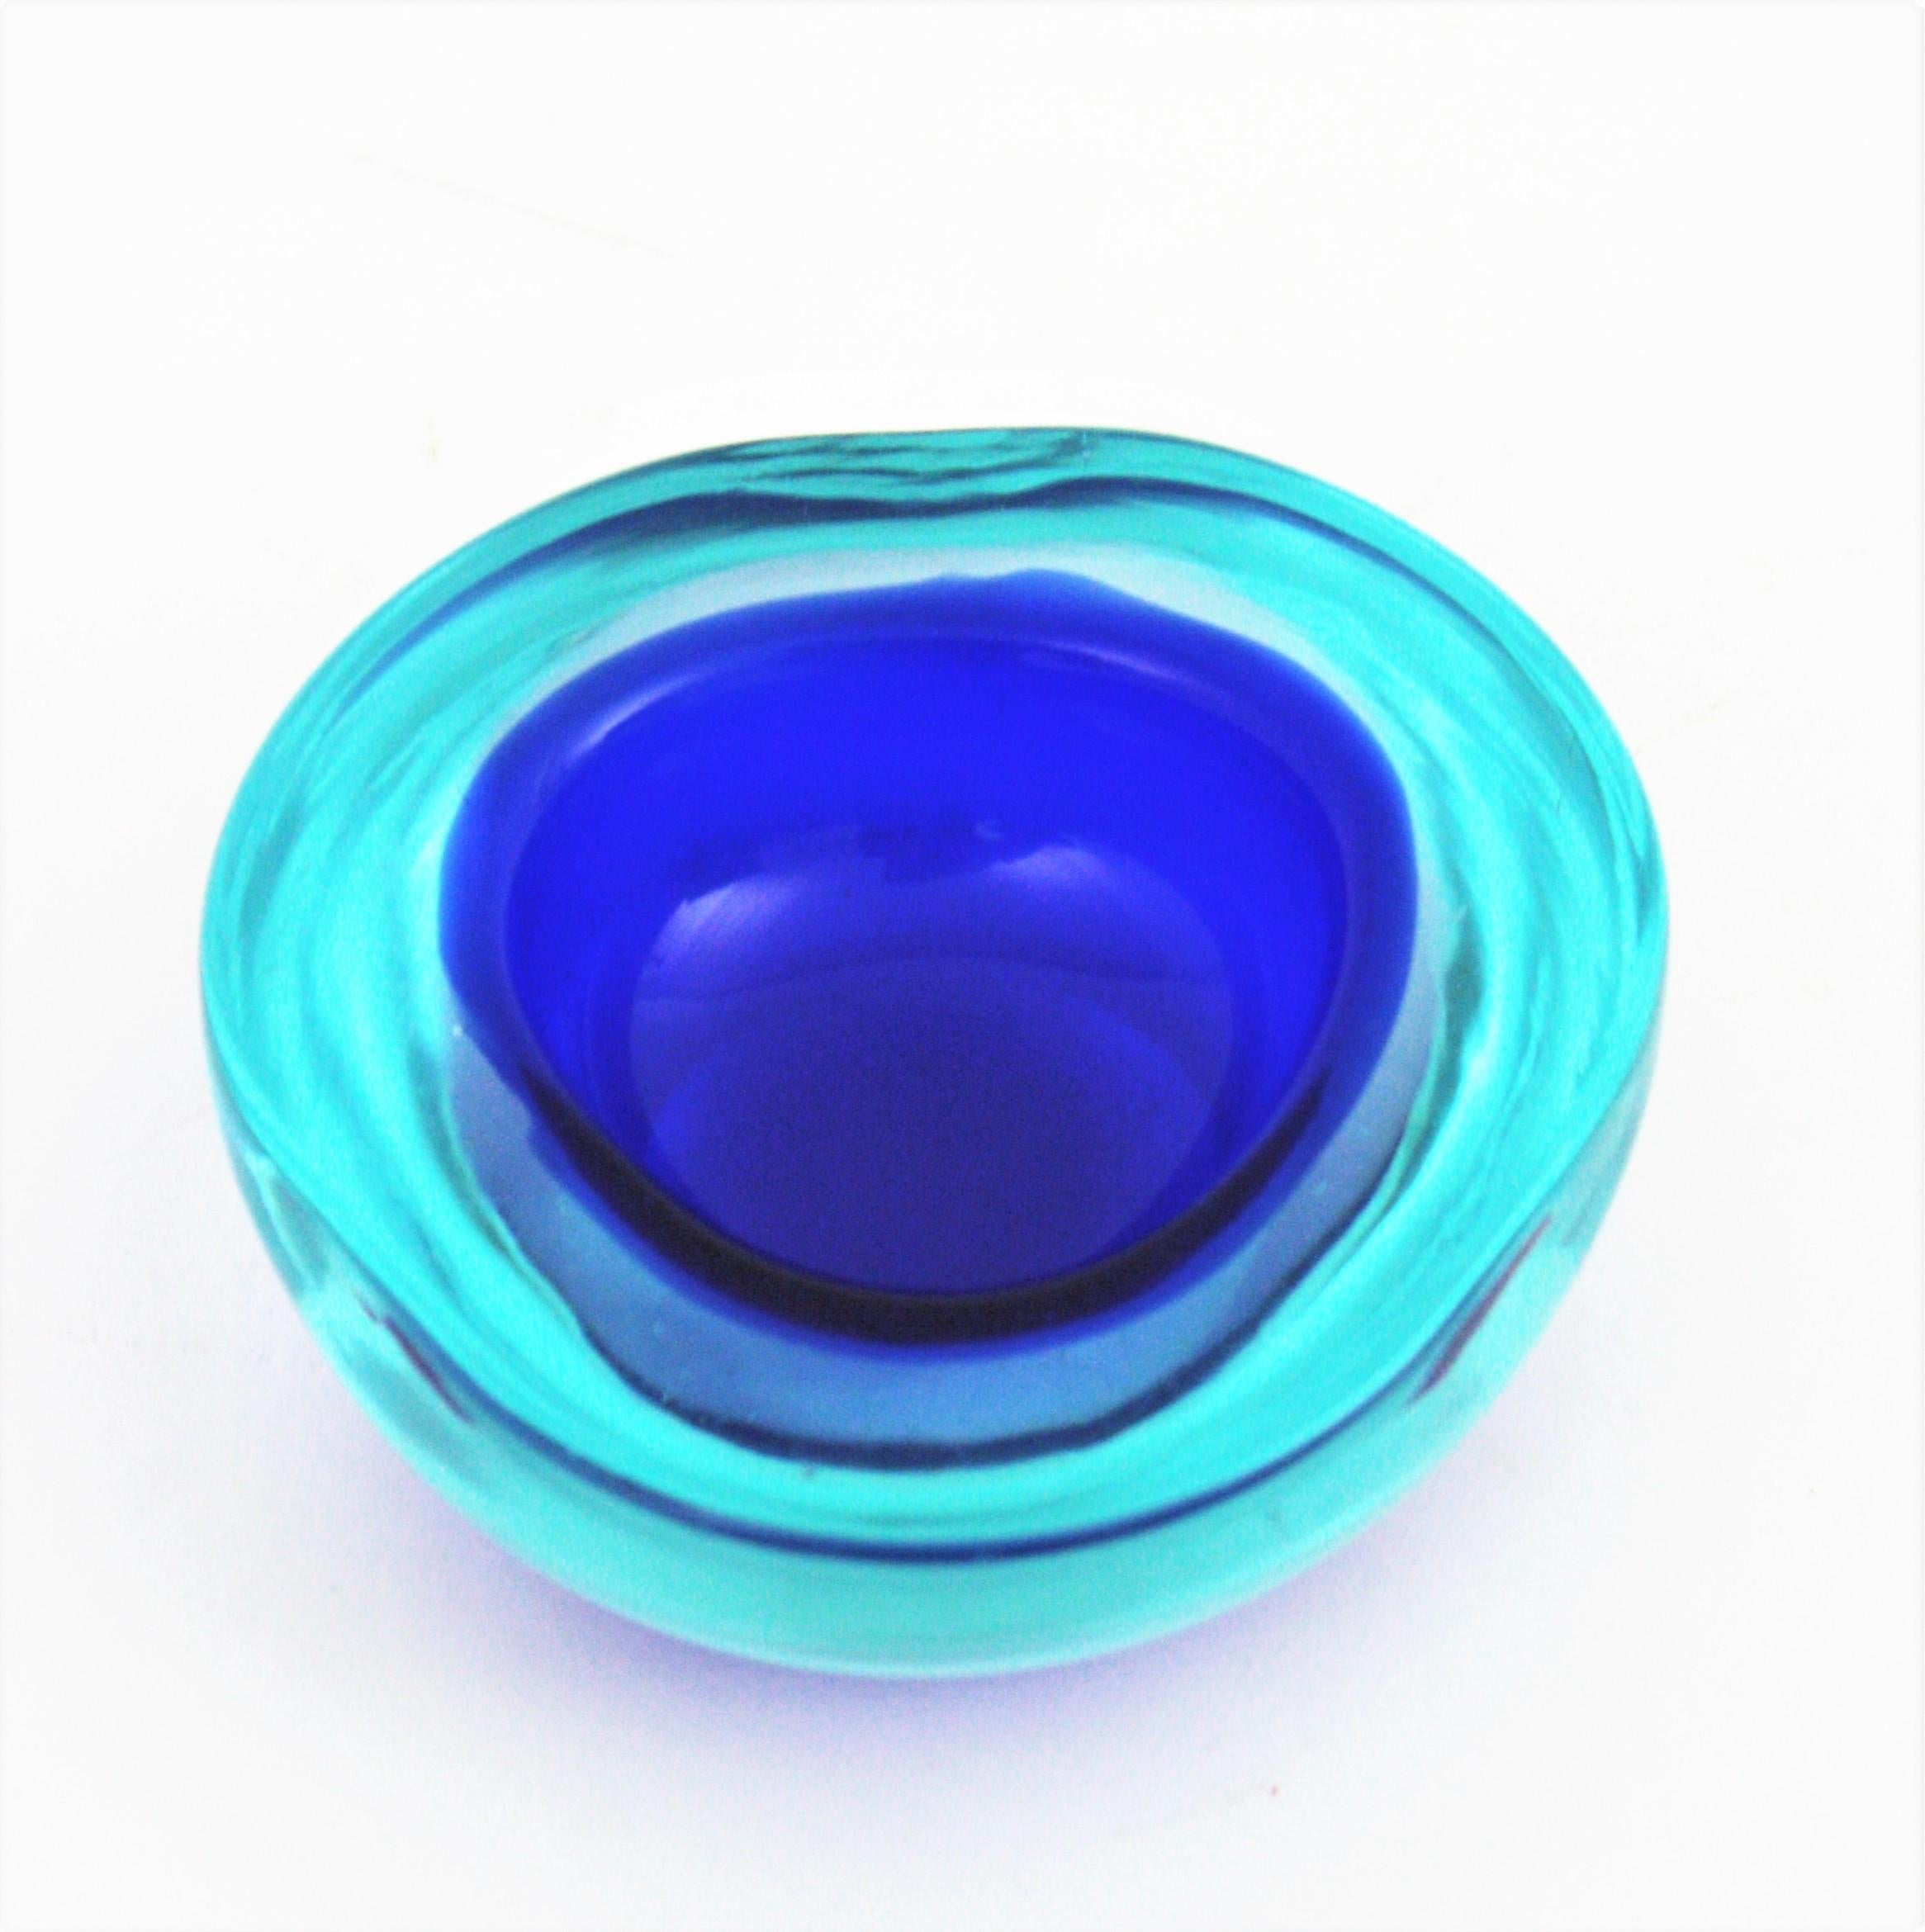 
Hand blown Murano glass Sommerso triangle geode bowl in dark blue and turquoise blue glass . Italy, 1960s.
A darker blue in the central part contrasting with the edge in turquoise blue using the 